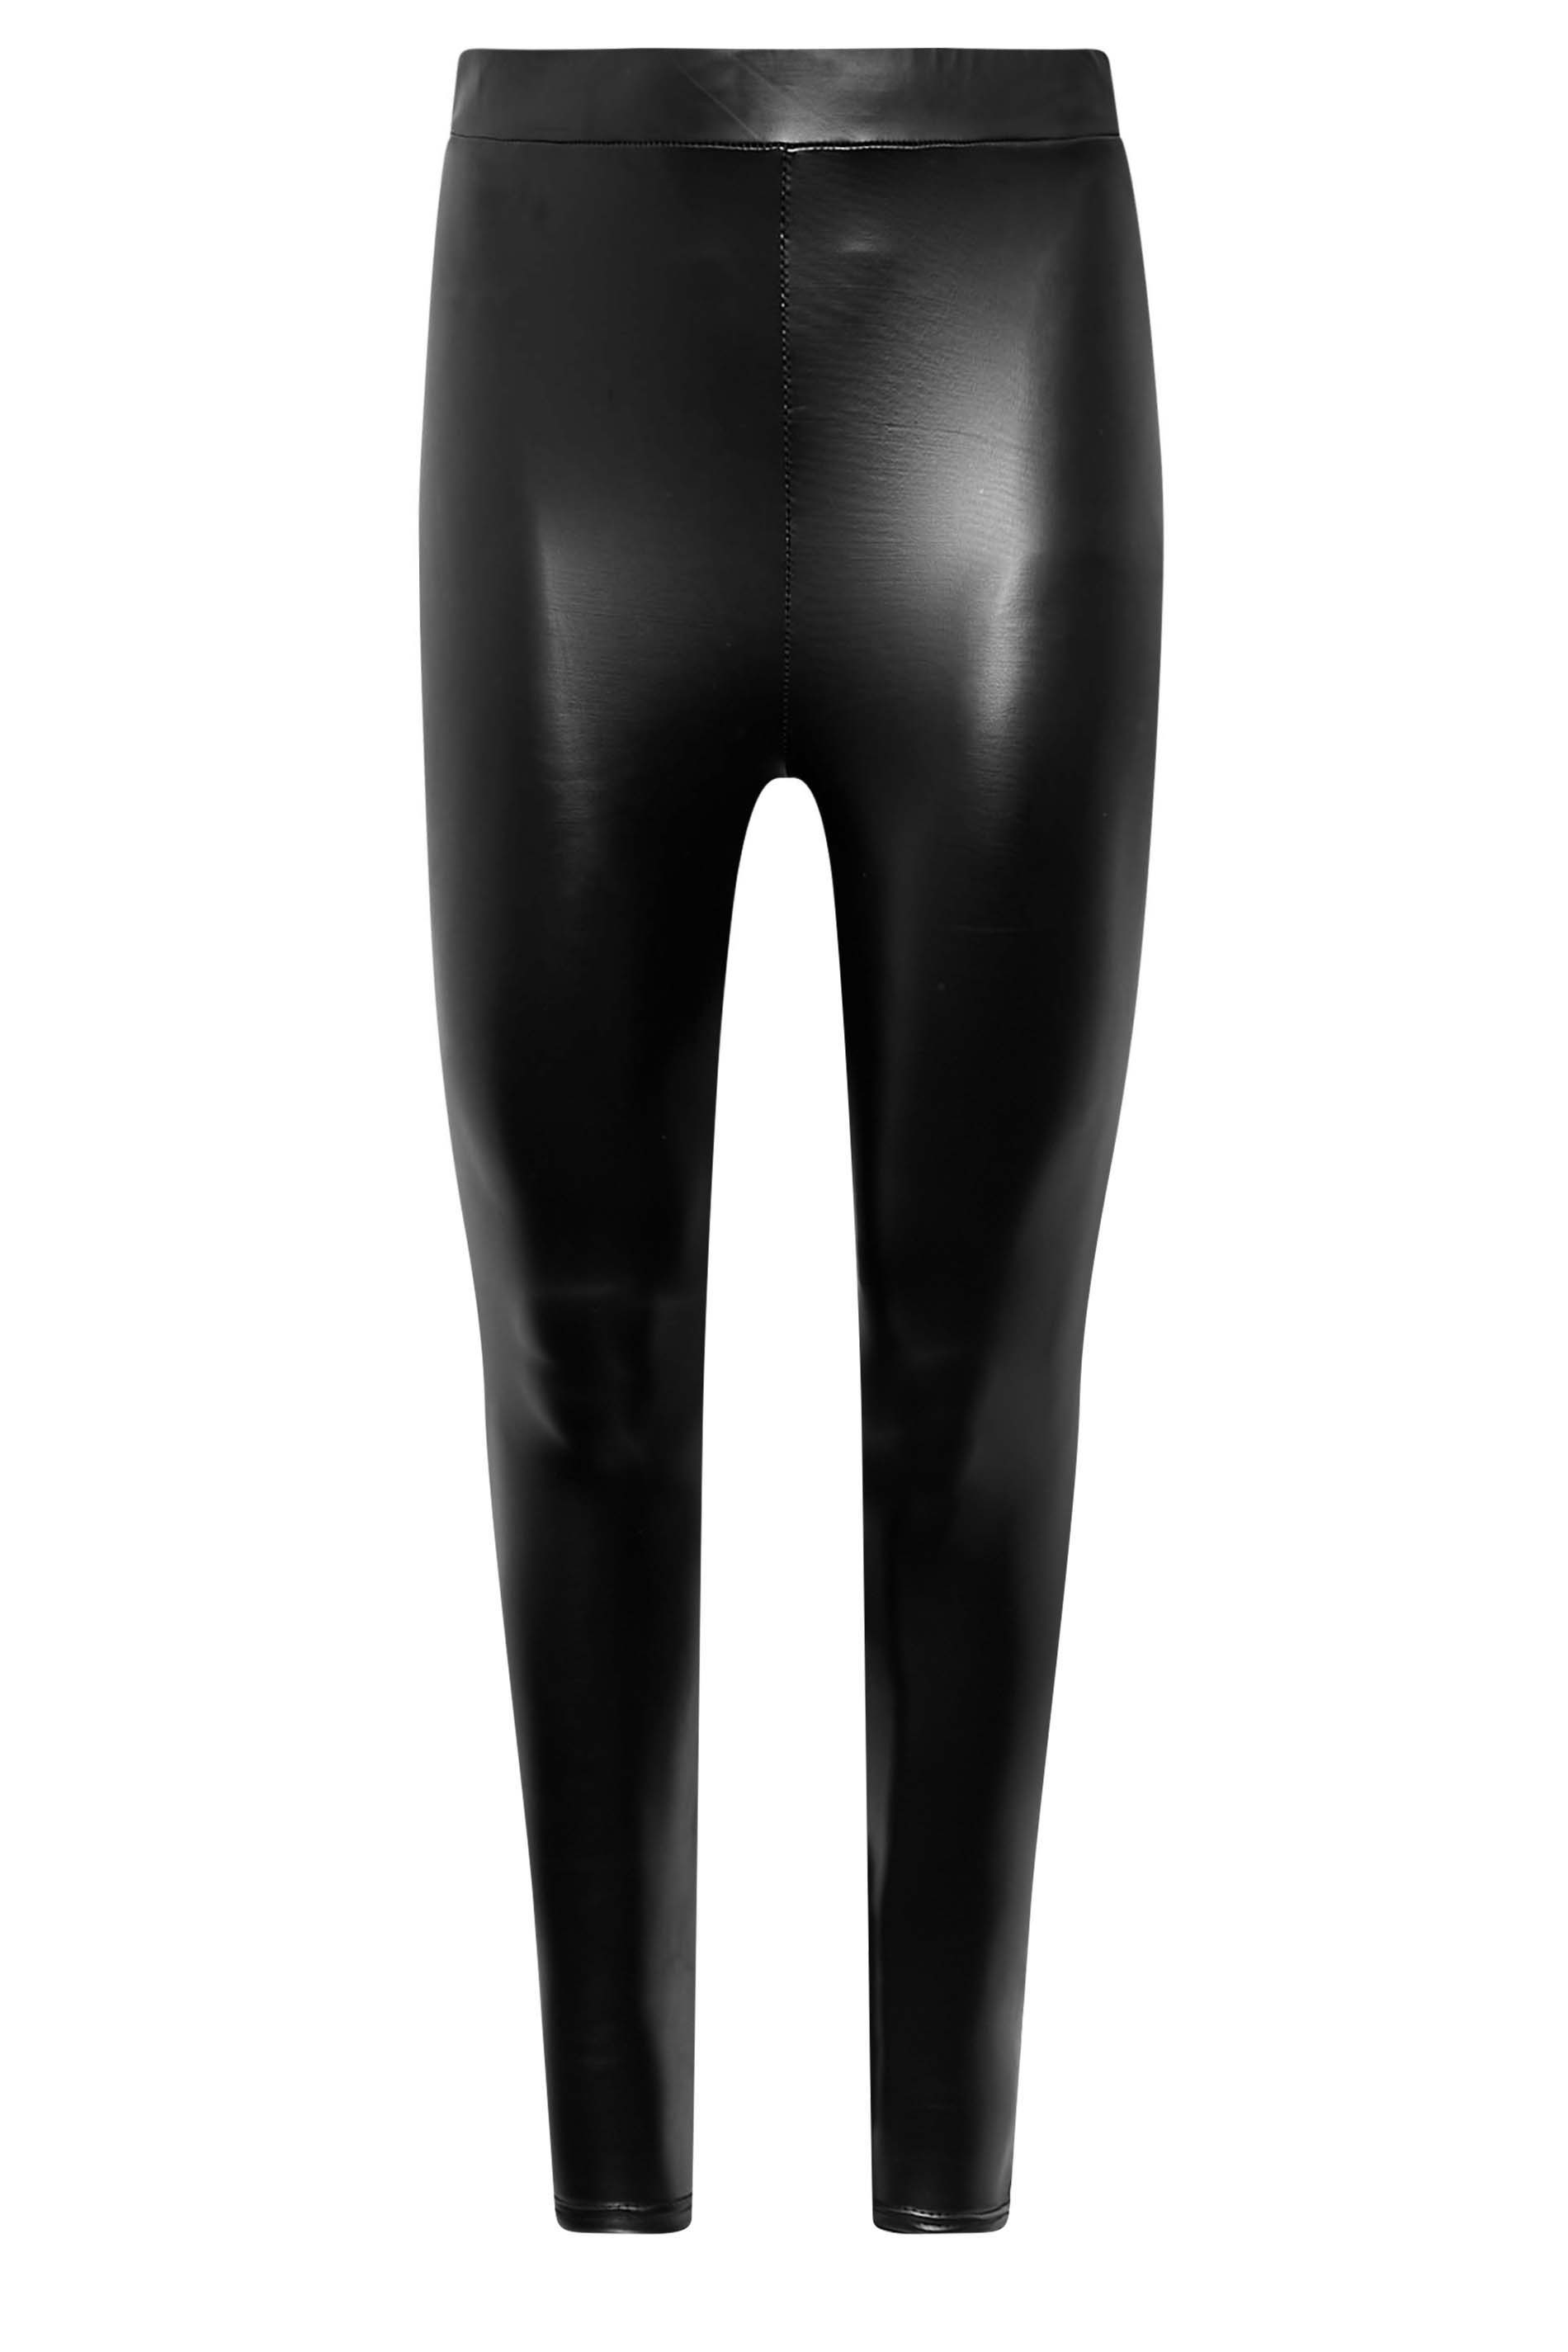 YOURS PETITE Curve Black Stretch Leather Look Leggings